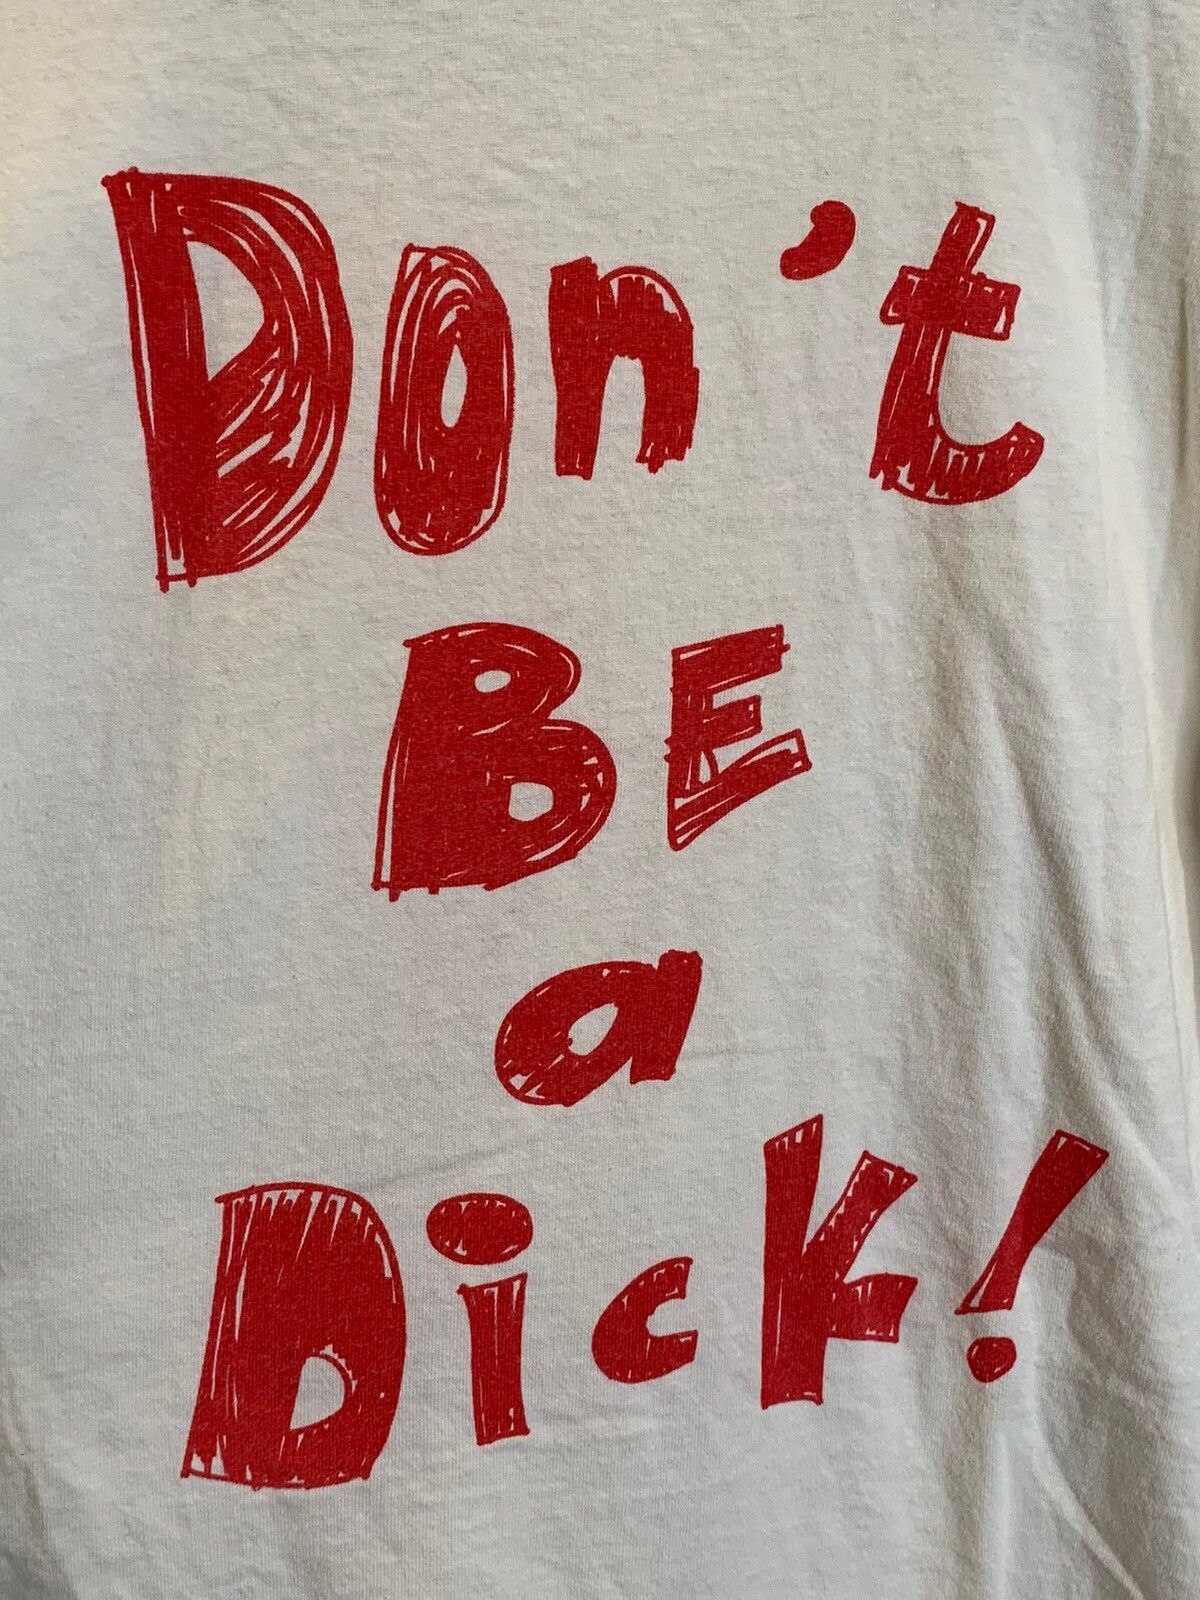 Vintage *RARE* Vintage 1988 See Dick With AIDS Don't Be A Dick